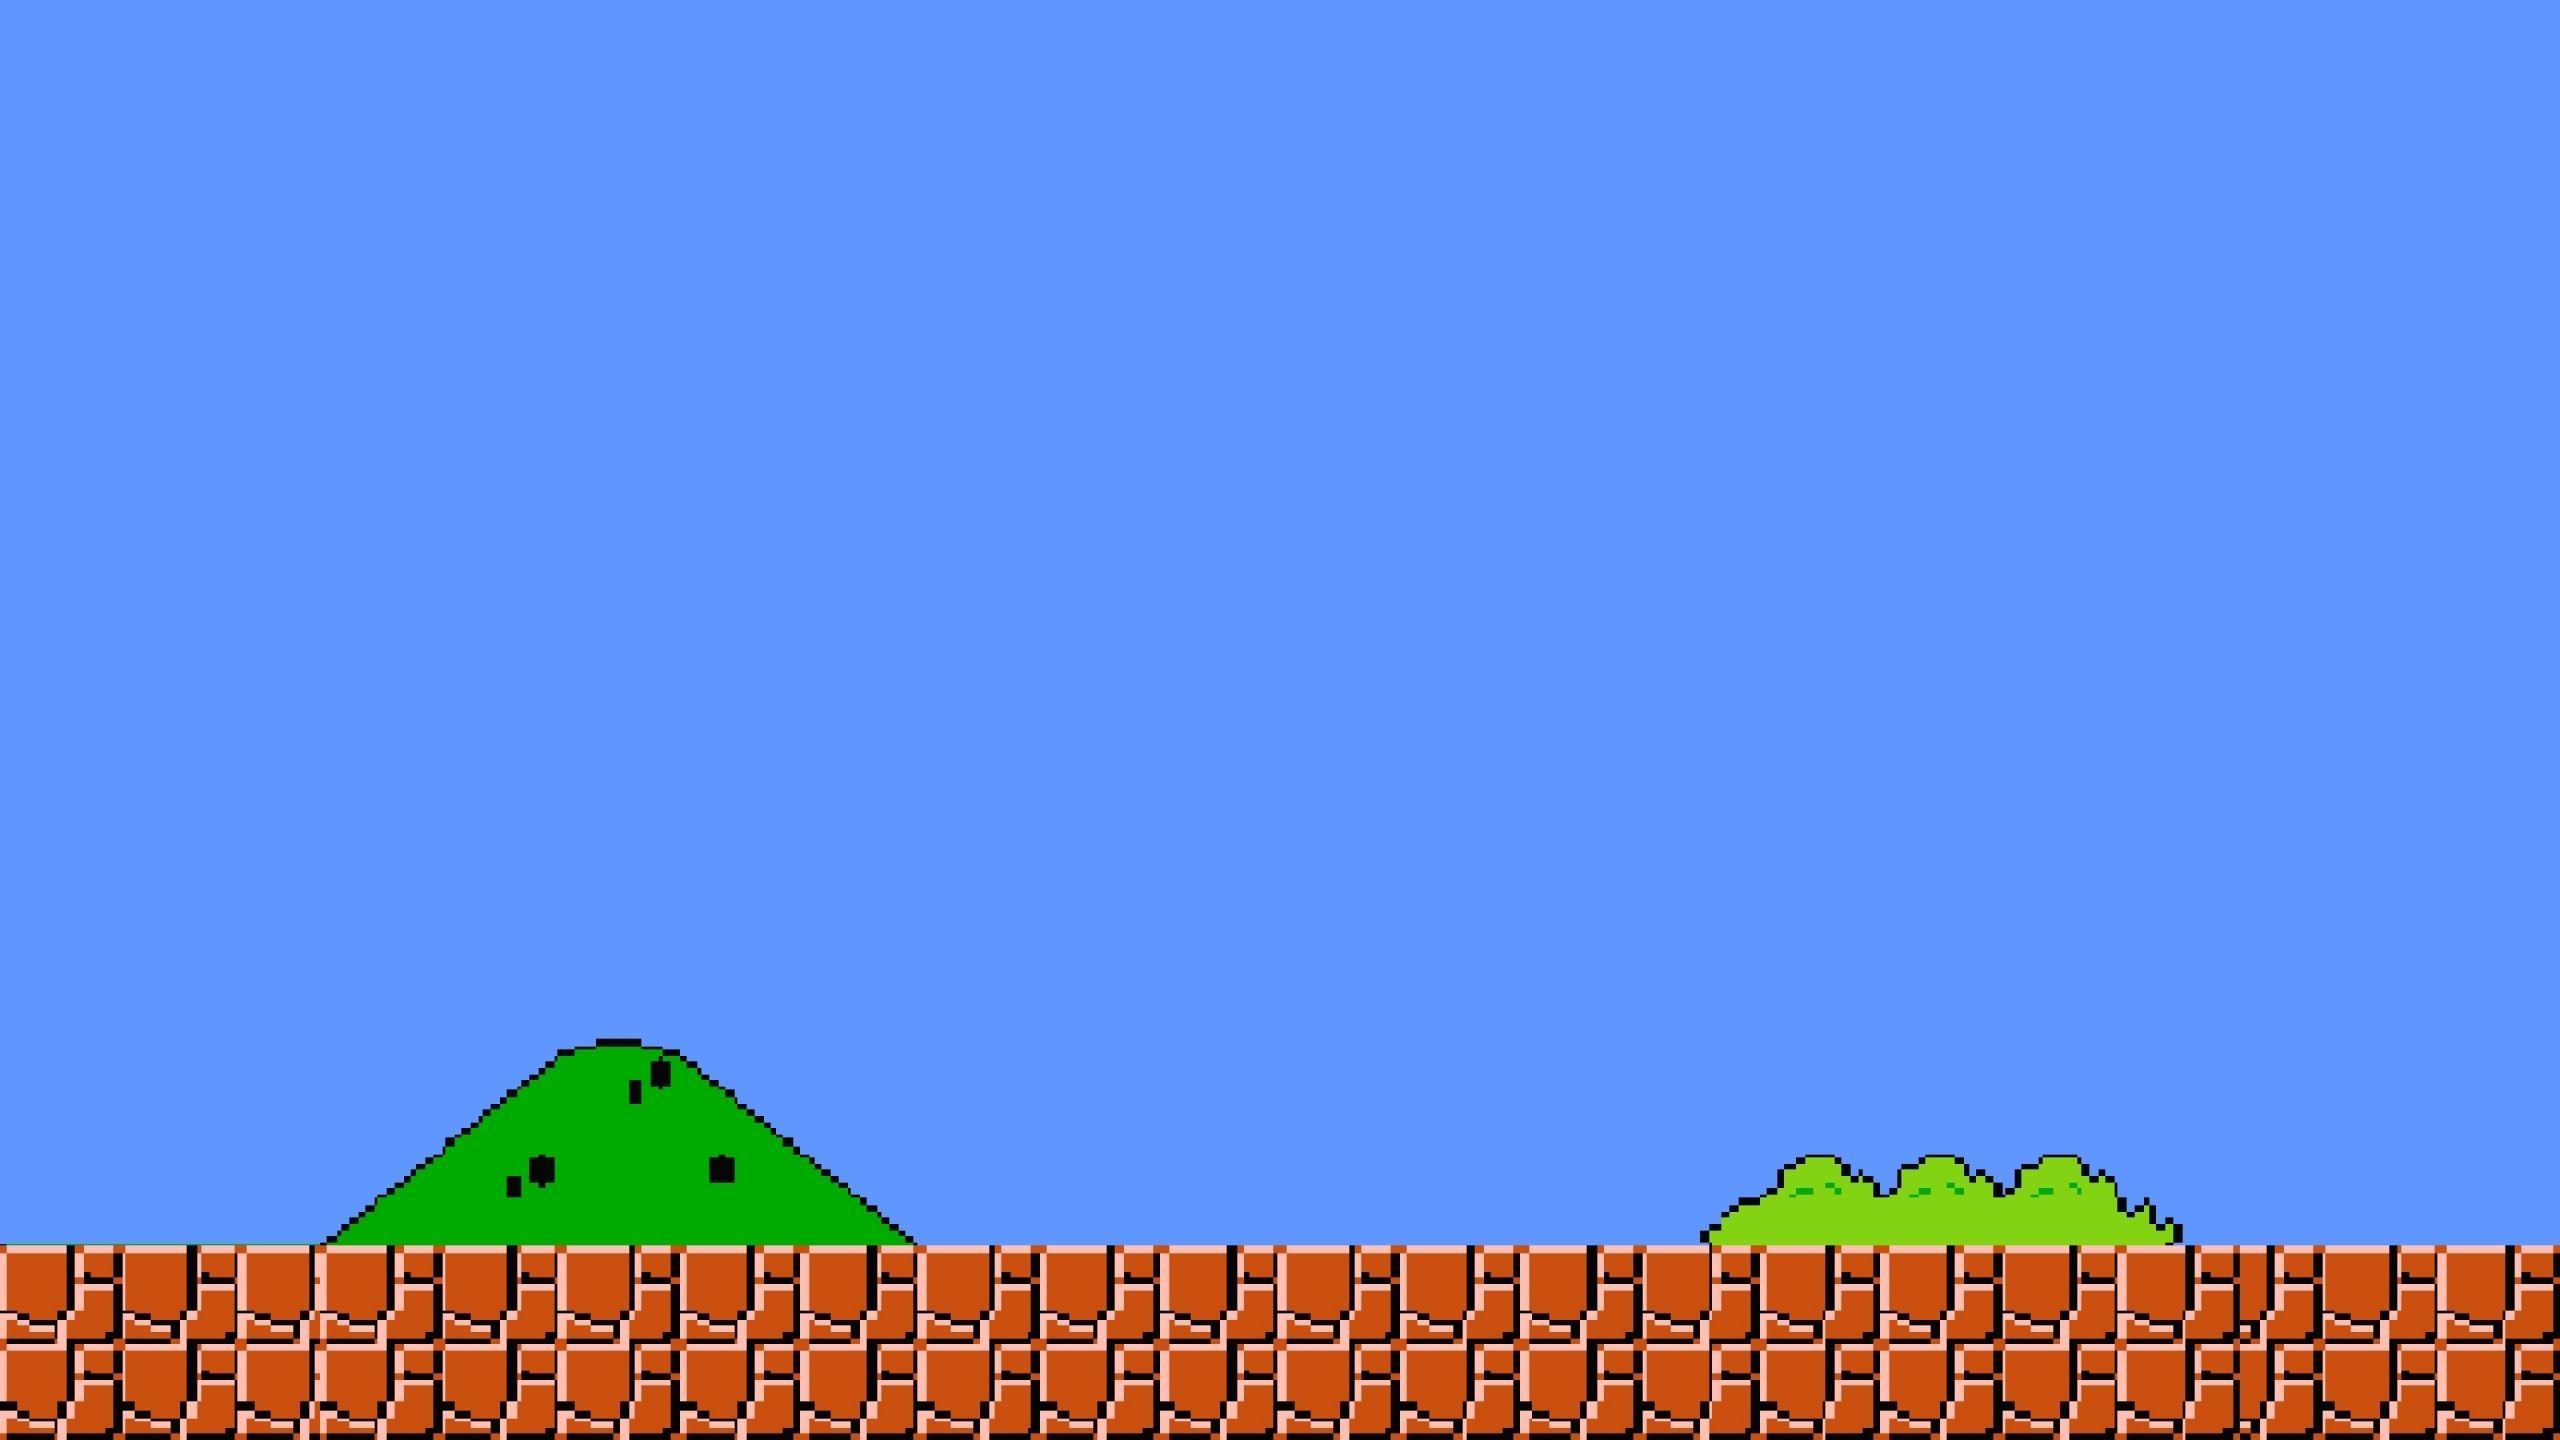 old super mario game download 1985 for pc